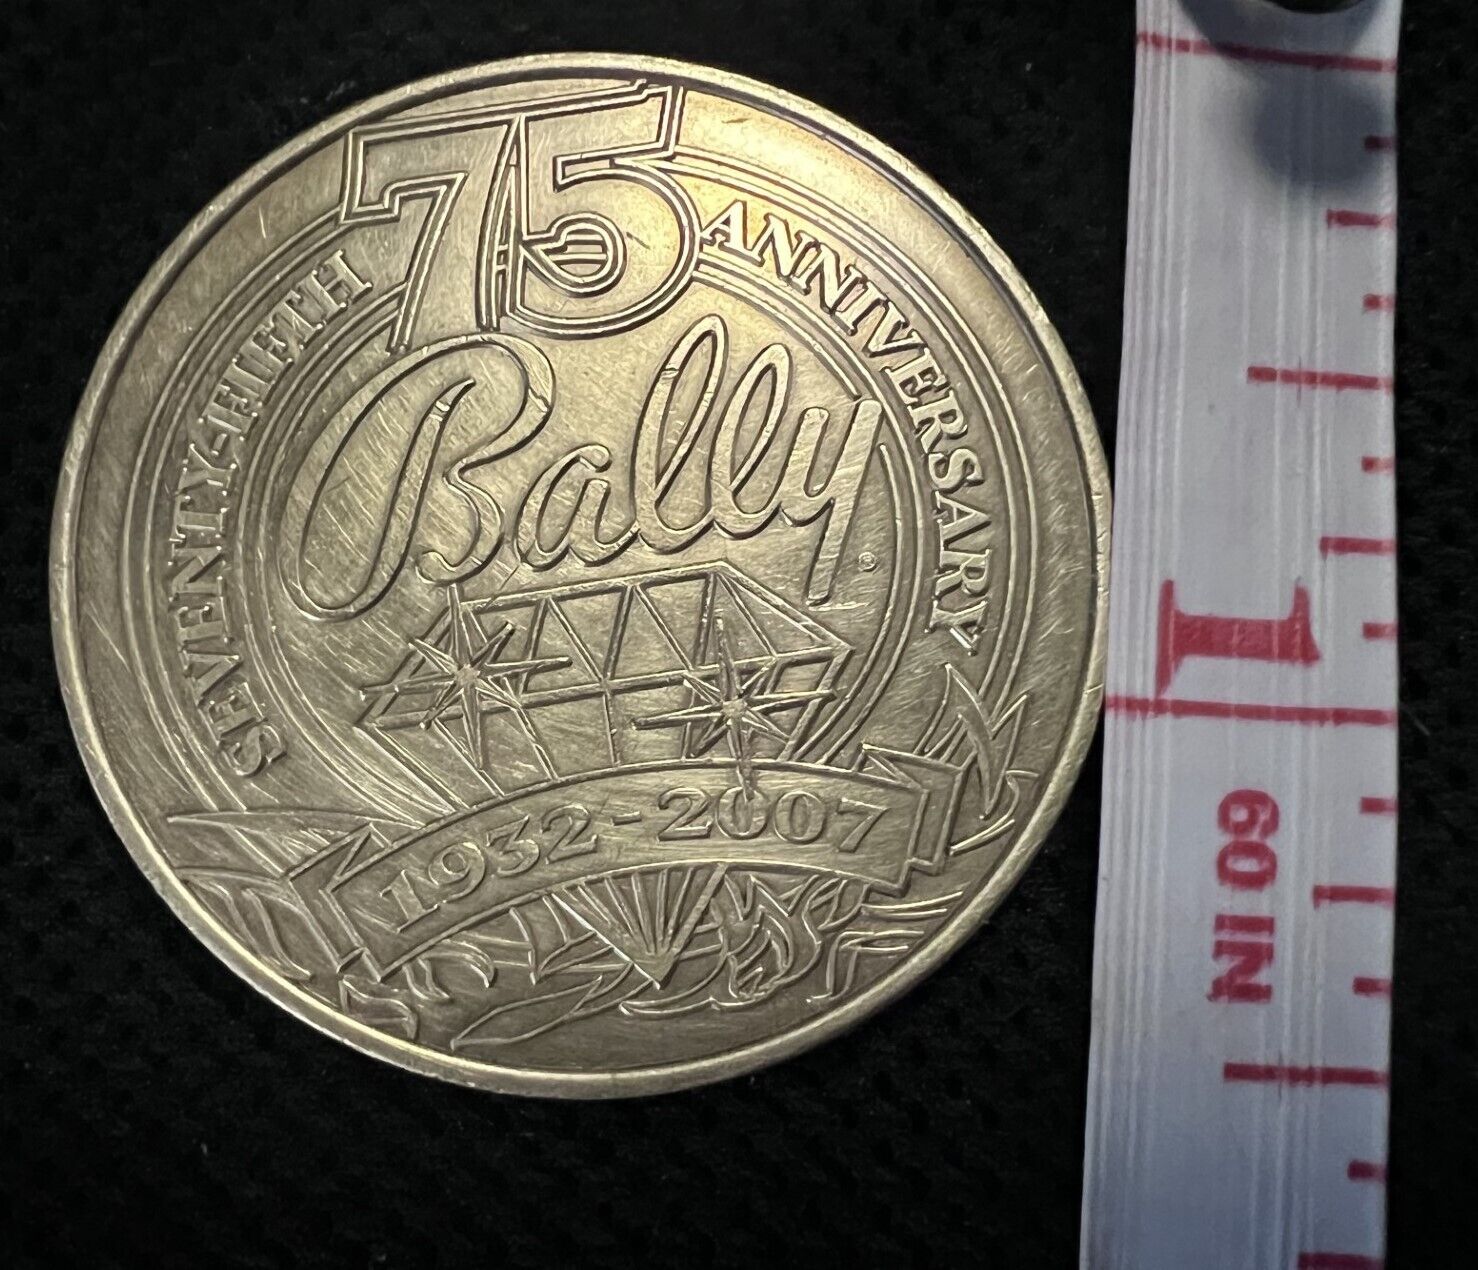 Bally's Slot Maker 75th anniversary medal 1932-2007. RARE Must add to your